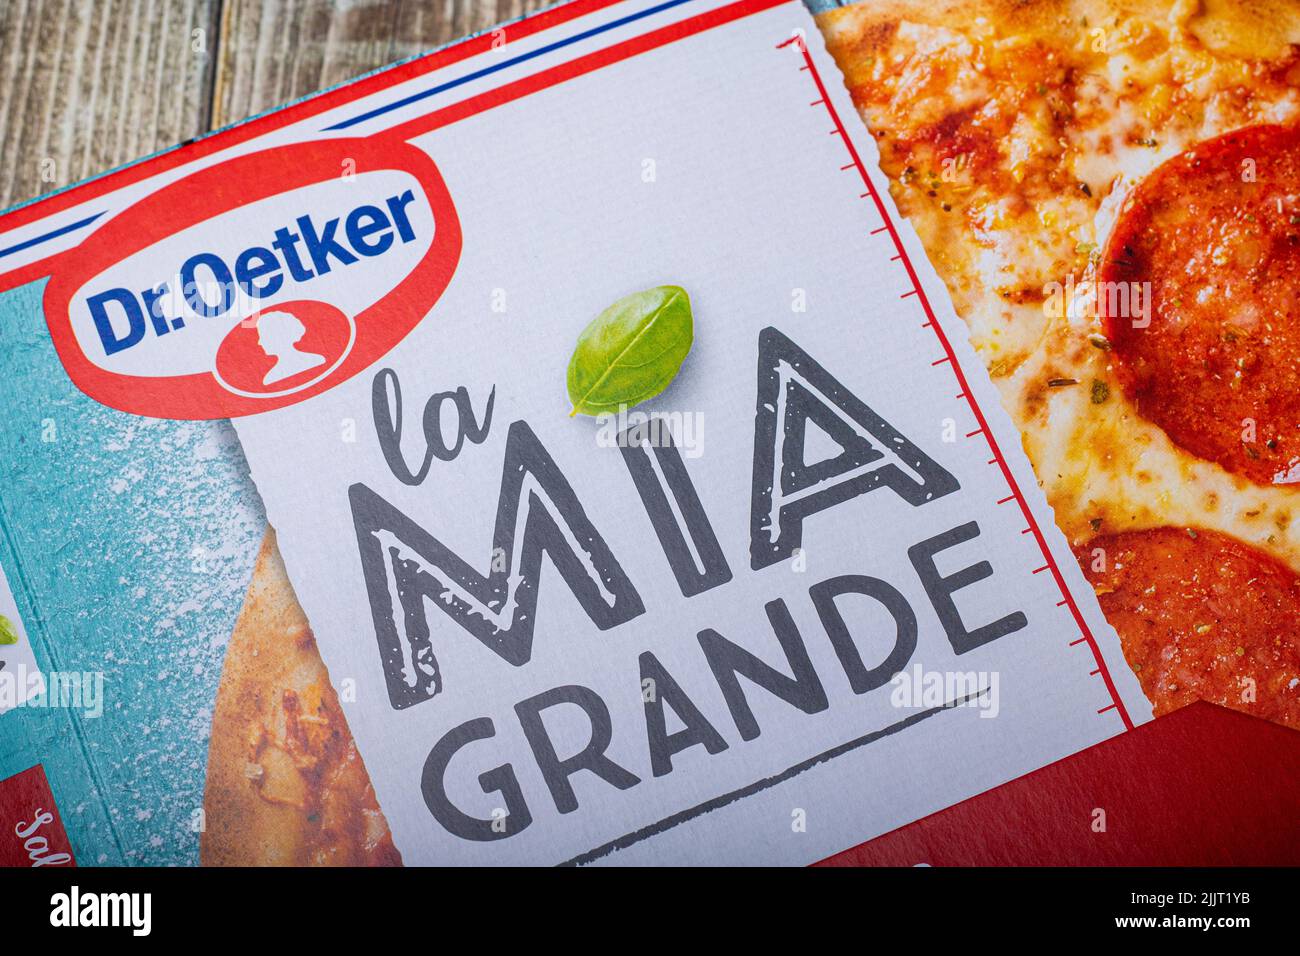 A closeup of a packaging of 'la Mia Grande' brand frozen pizza from German food manufacturer 'Dr. Oetker' Stock Photo